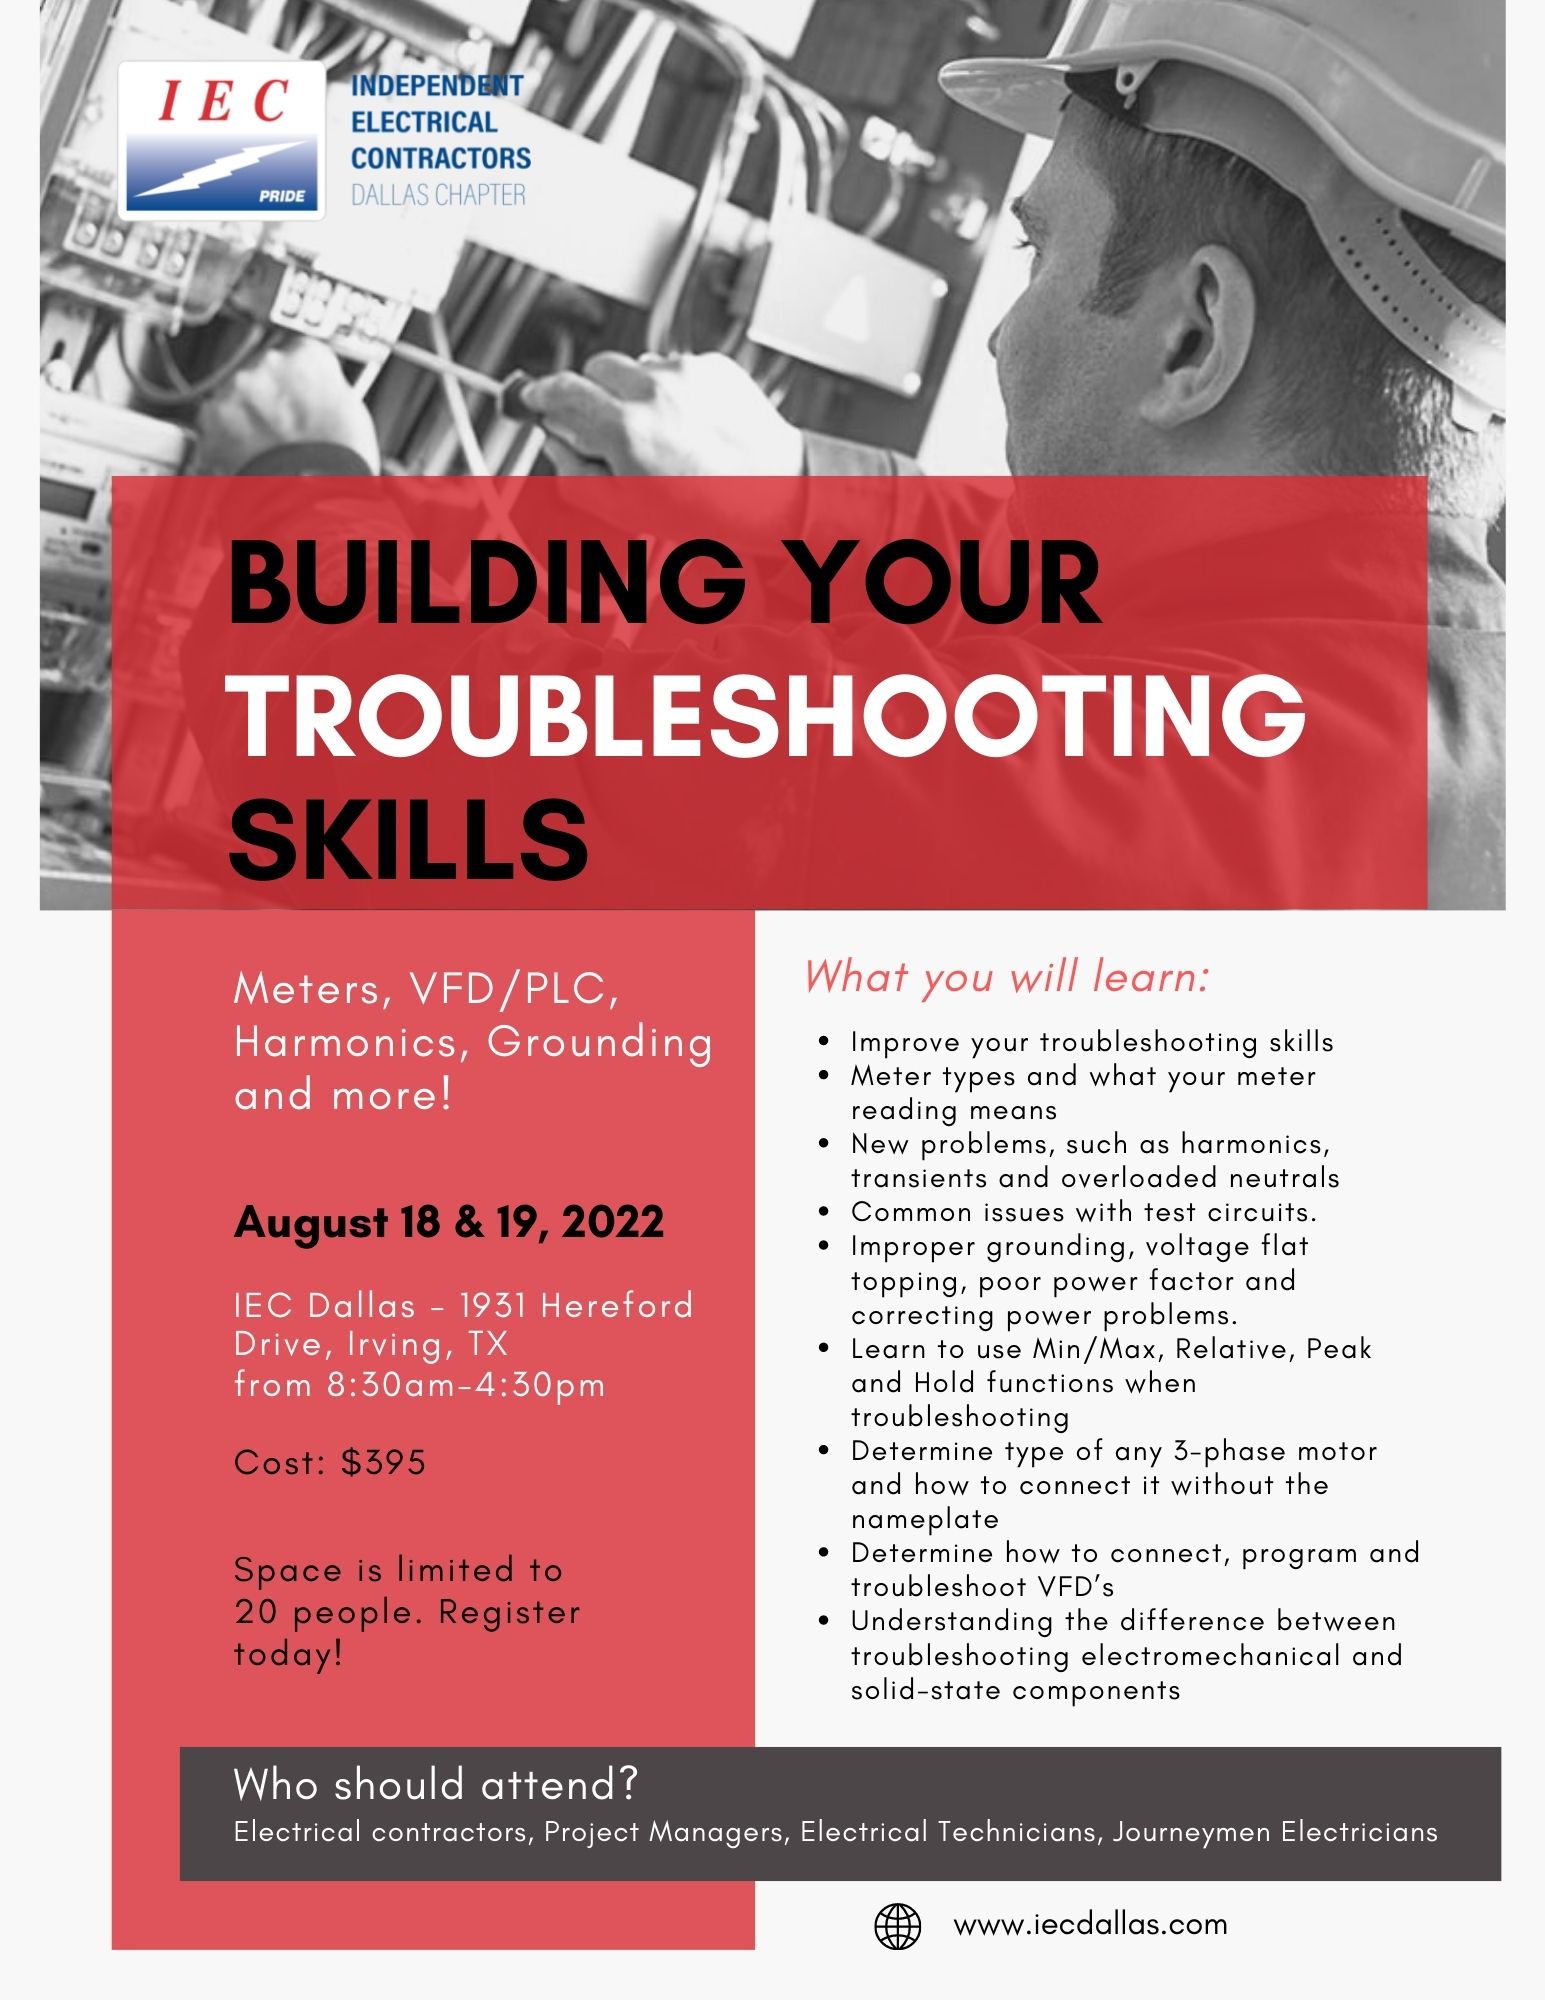 Building Your Troubleshooting Skills